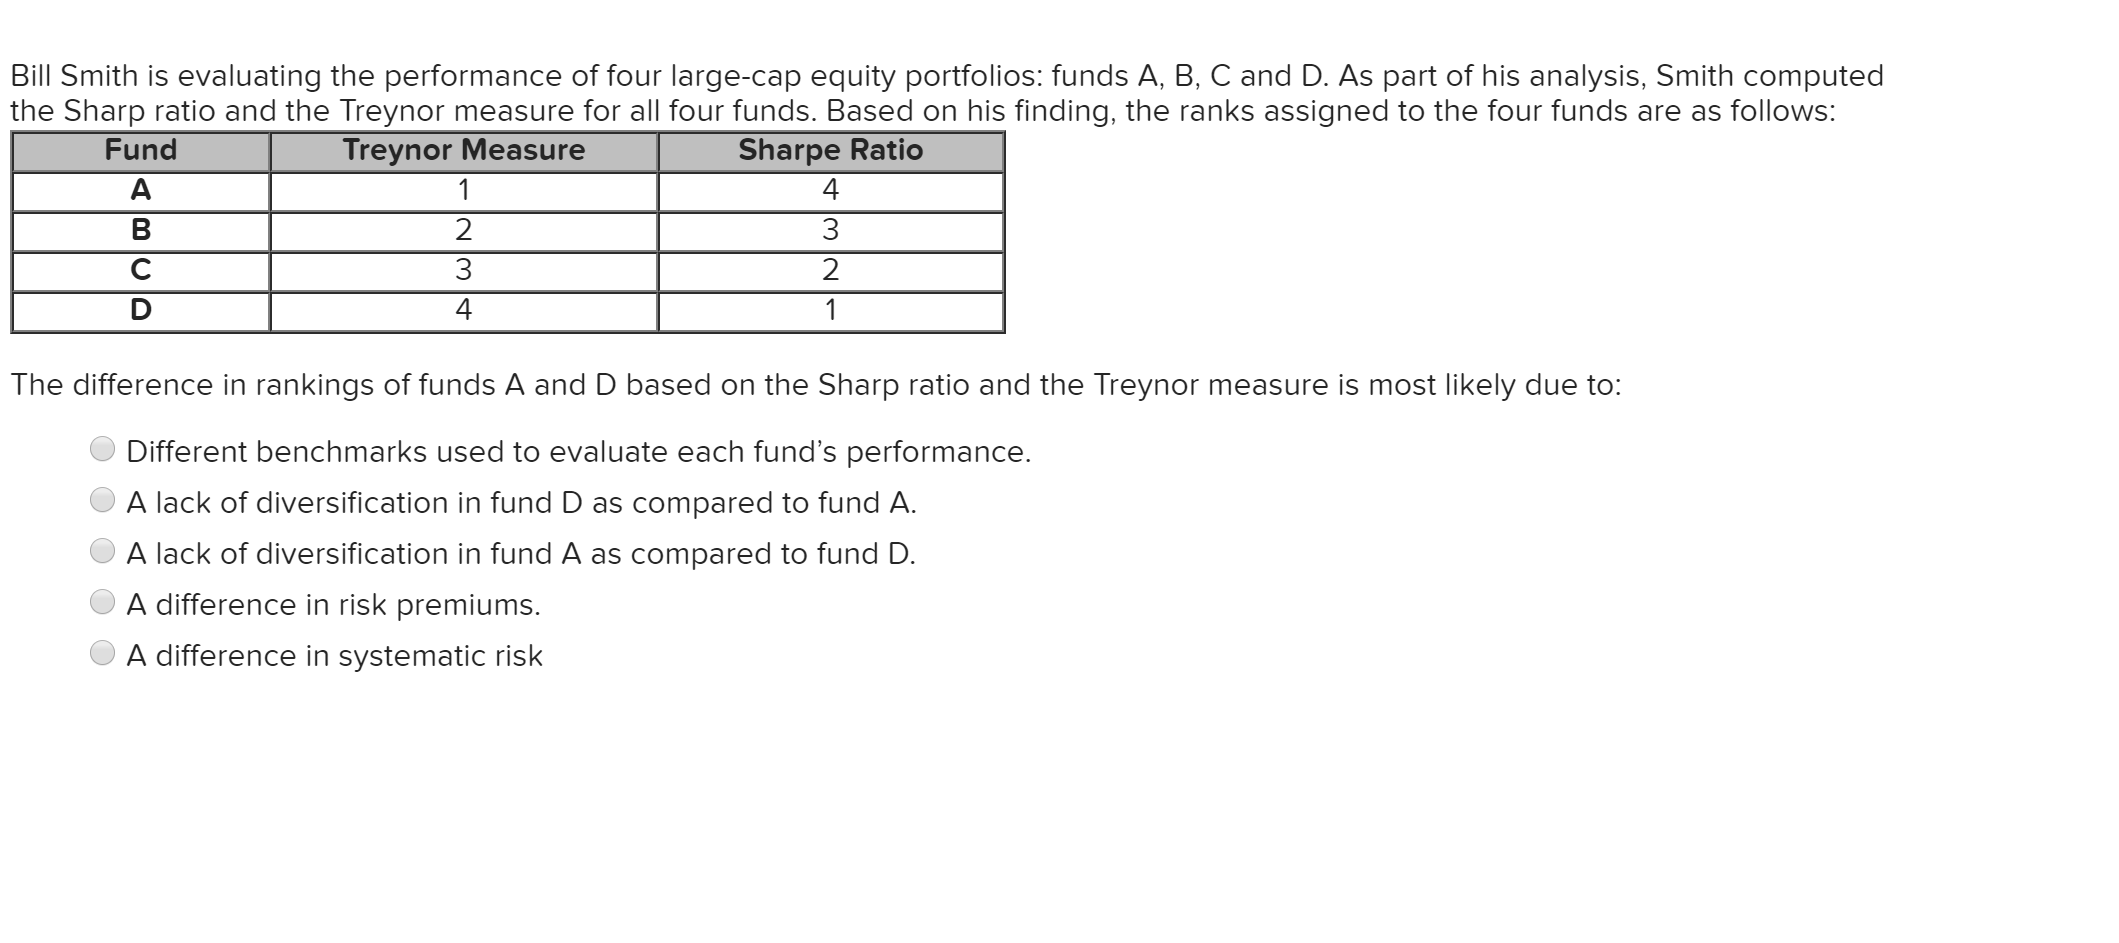 Bill Smith is evaluating the performance of four large-cap equity portfolios: funds A, B, C and D. As part of his analysis, Smith computed
the Sharp ratio and the Treynor measure for all four funds. Based on his finding, the ranks assigned to the four funds are as follows:
Treynor Measure
Sharpe Ratio
Fund
A
1
4
в
2
3
C
3
2
D
4
1
The difference in rankings of funds A and D based on the Sharp ratio and the Treynor measure
most likely due to:
Different benchmarks used to evaluate each fund's performance.
A lack of diversification in fund D as compared to fund A.
A lack of diversification in fund A as compared to fund D
A difference in risk premiums
A difference in systematic risk
